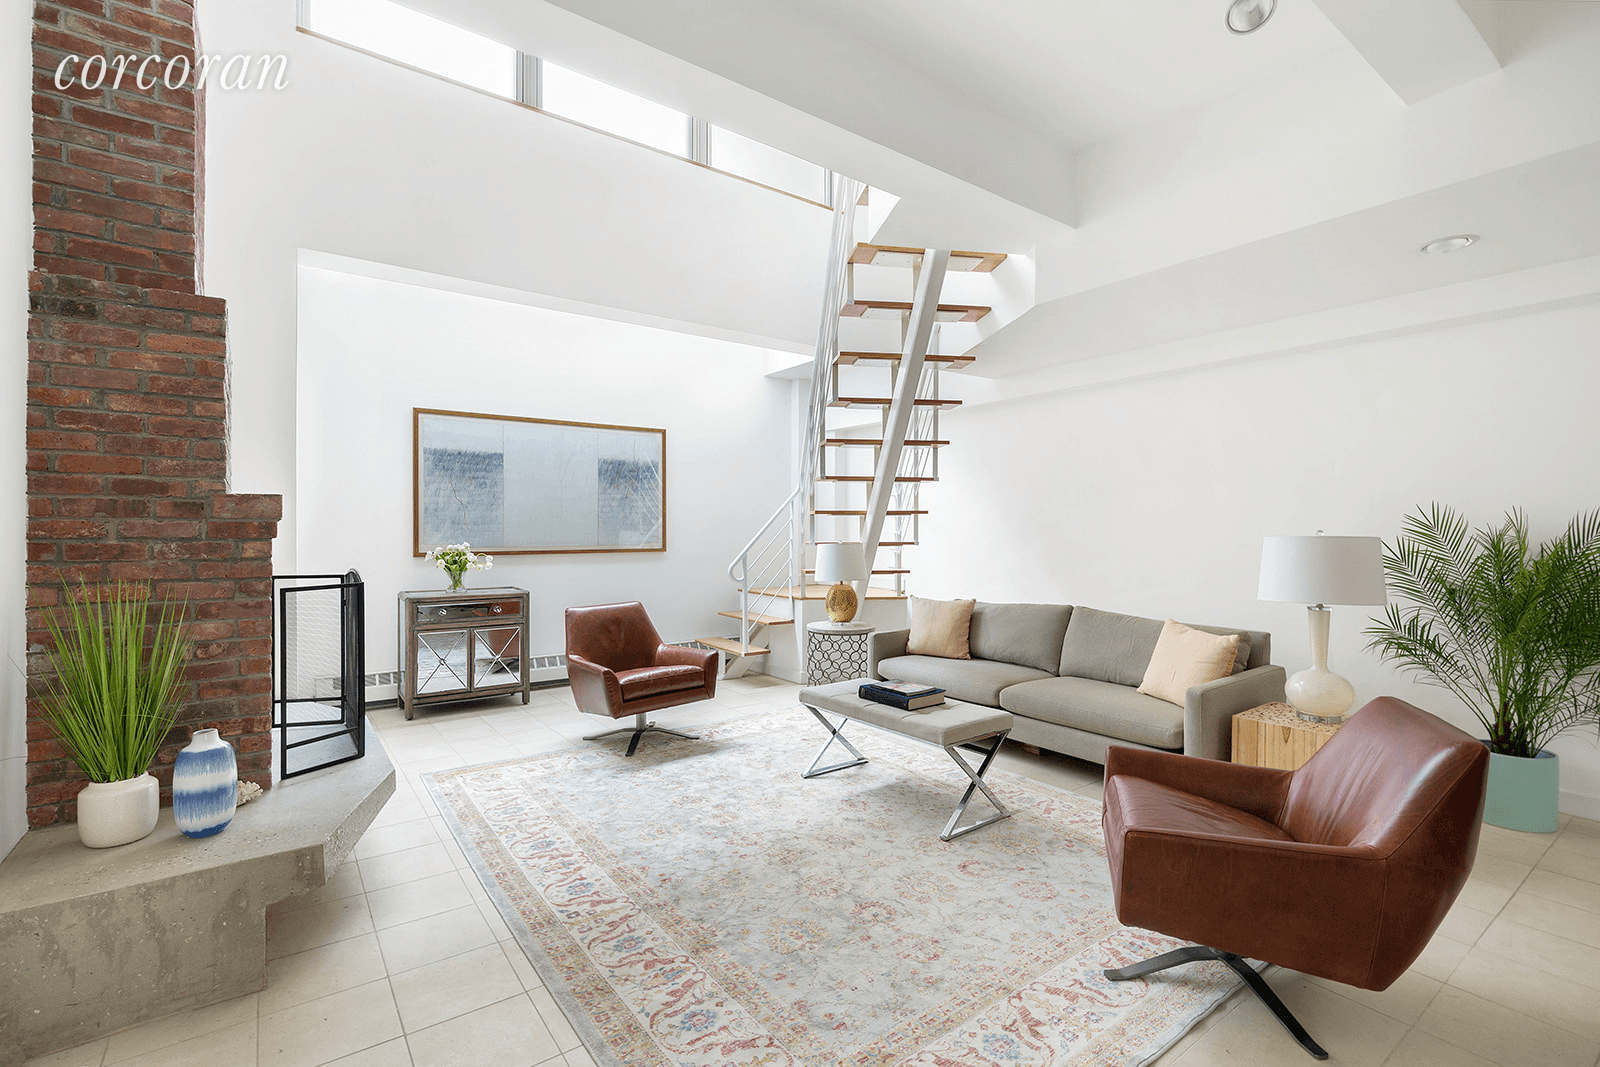 328 Dean Street 1C is located in the much sought after Boerum Hill neighborhood of Downtown Brooklyn.